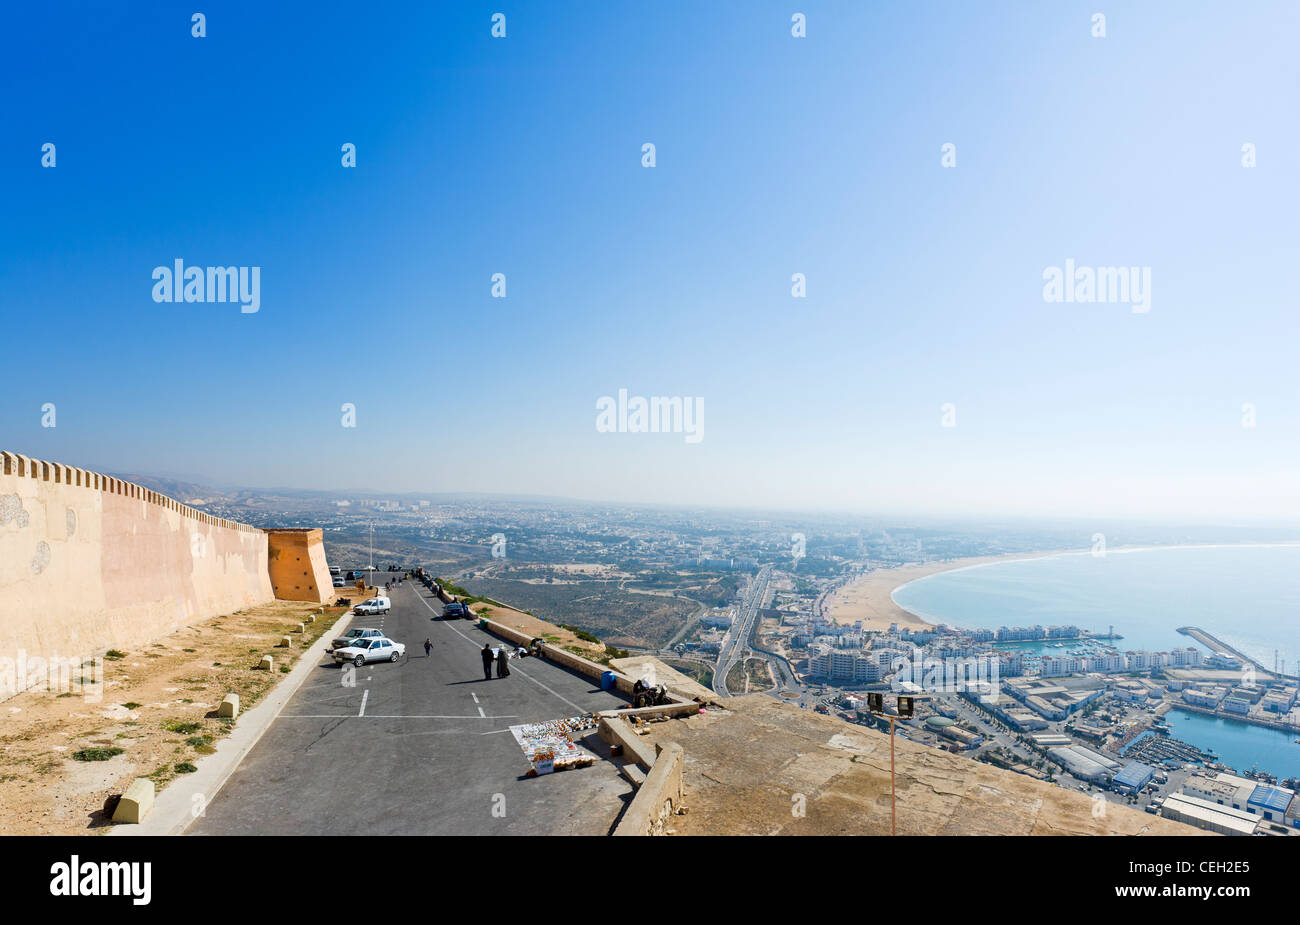 View over Agadir from the old Kasbah, Morocco, North Africa Stock Photo